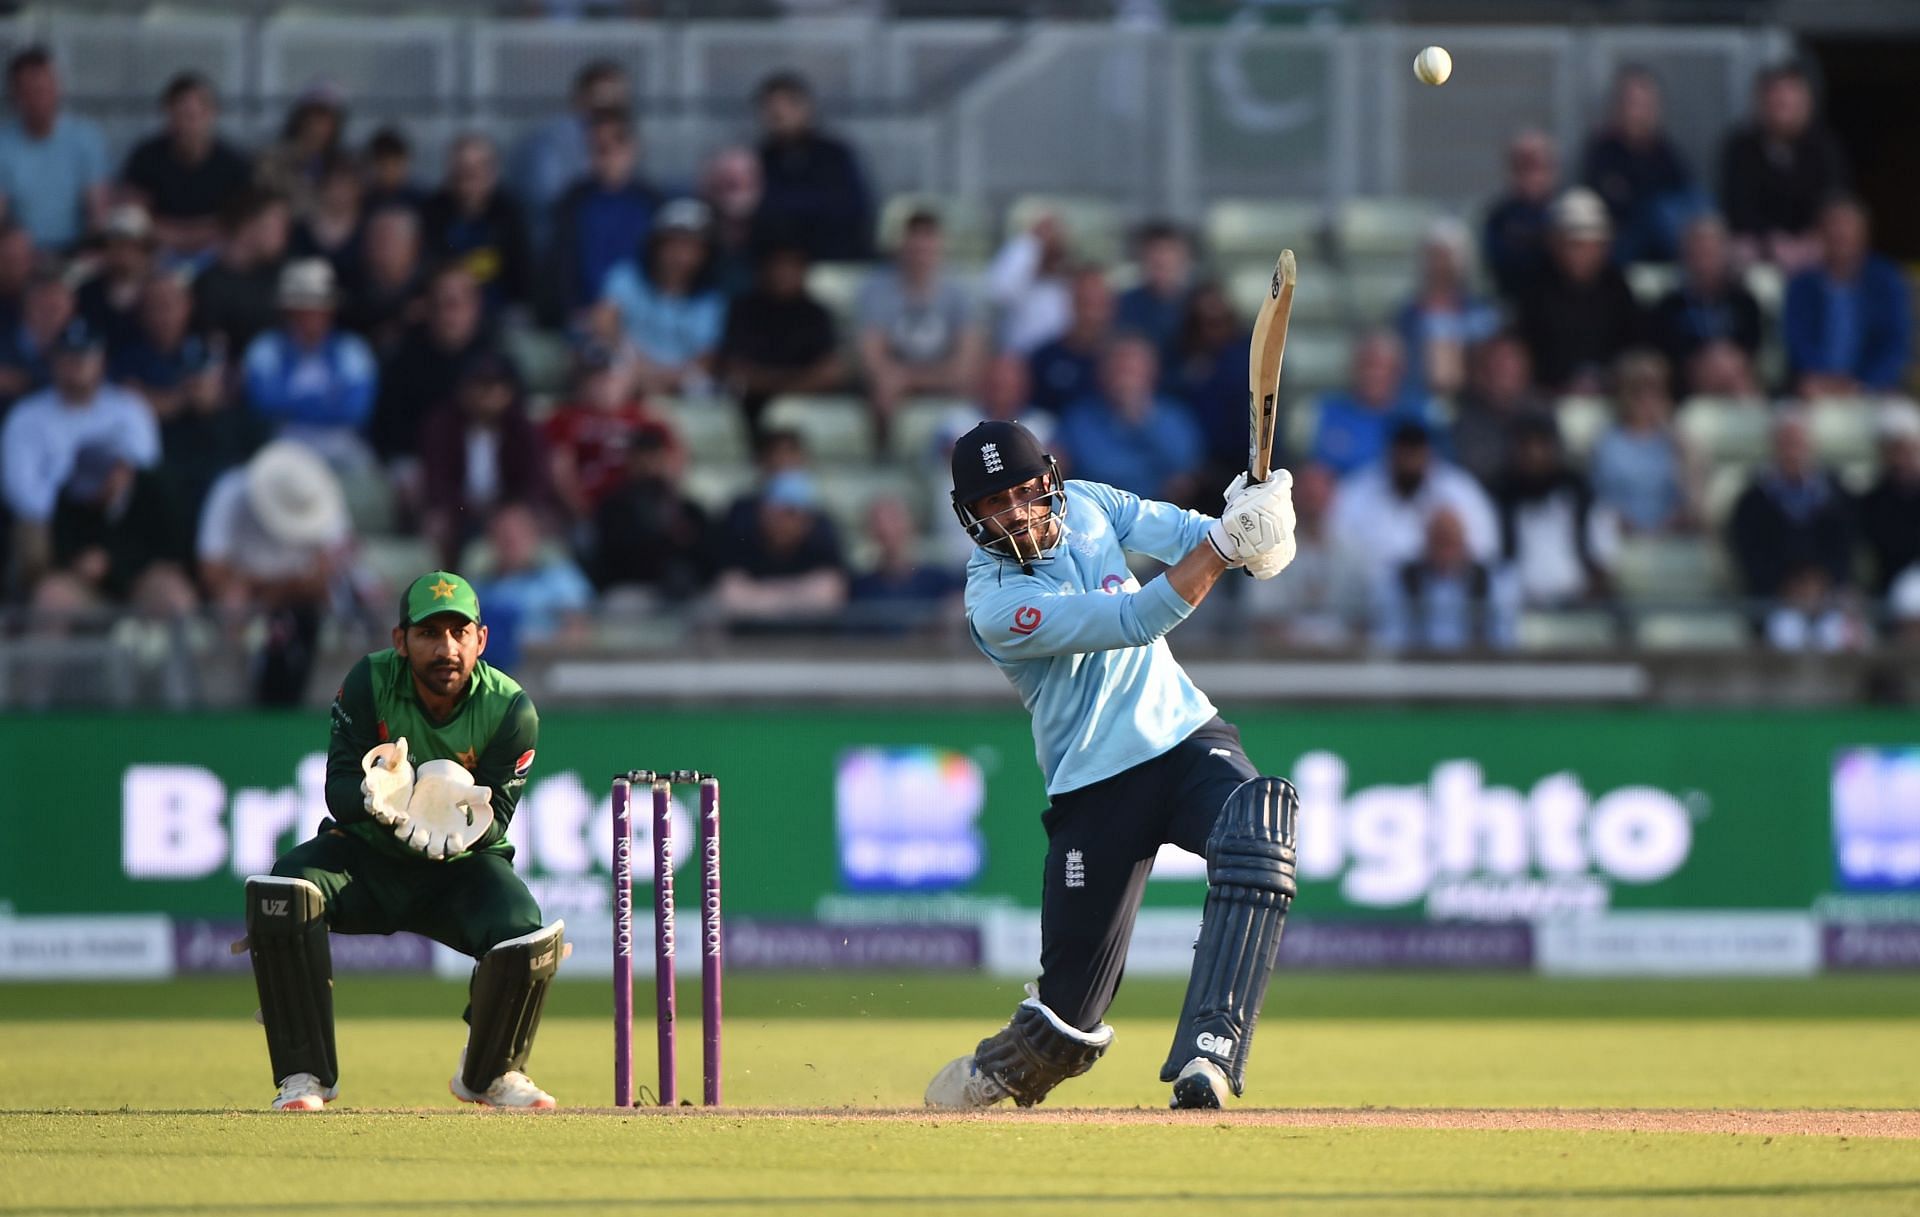 James Vince lofts one during the 3rd ODI against Pakistan. Pic: Getty Images